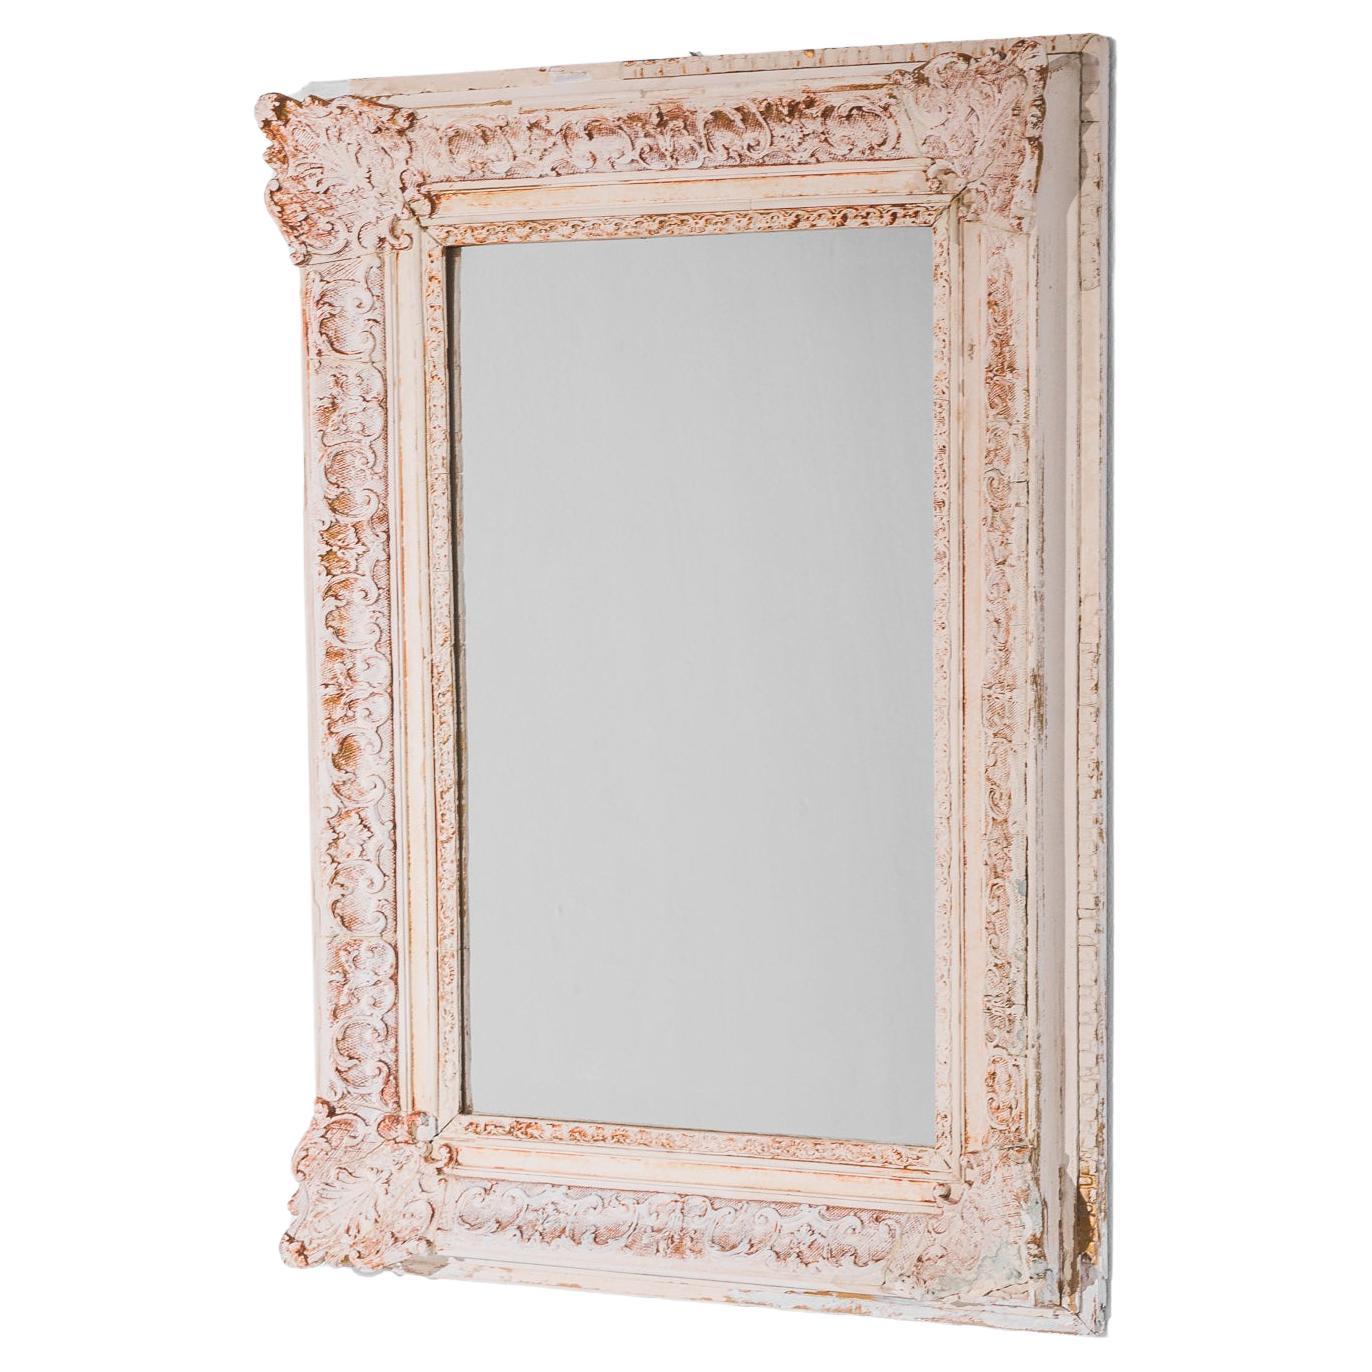 1880s French White Patinated Rococo Mirror